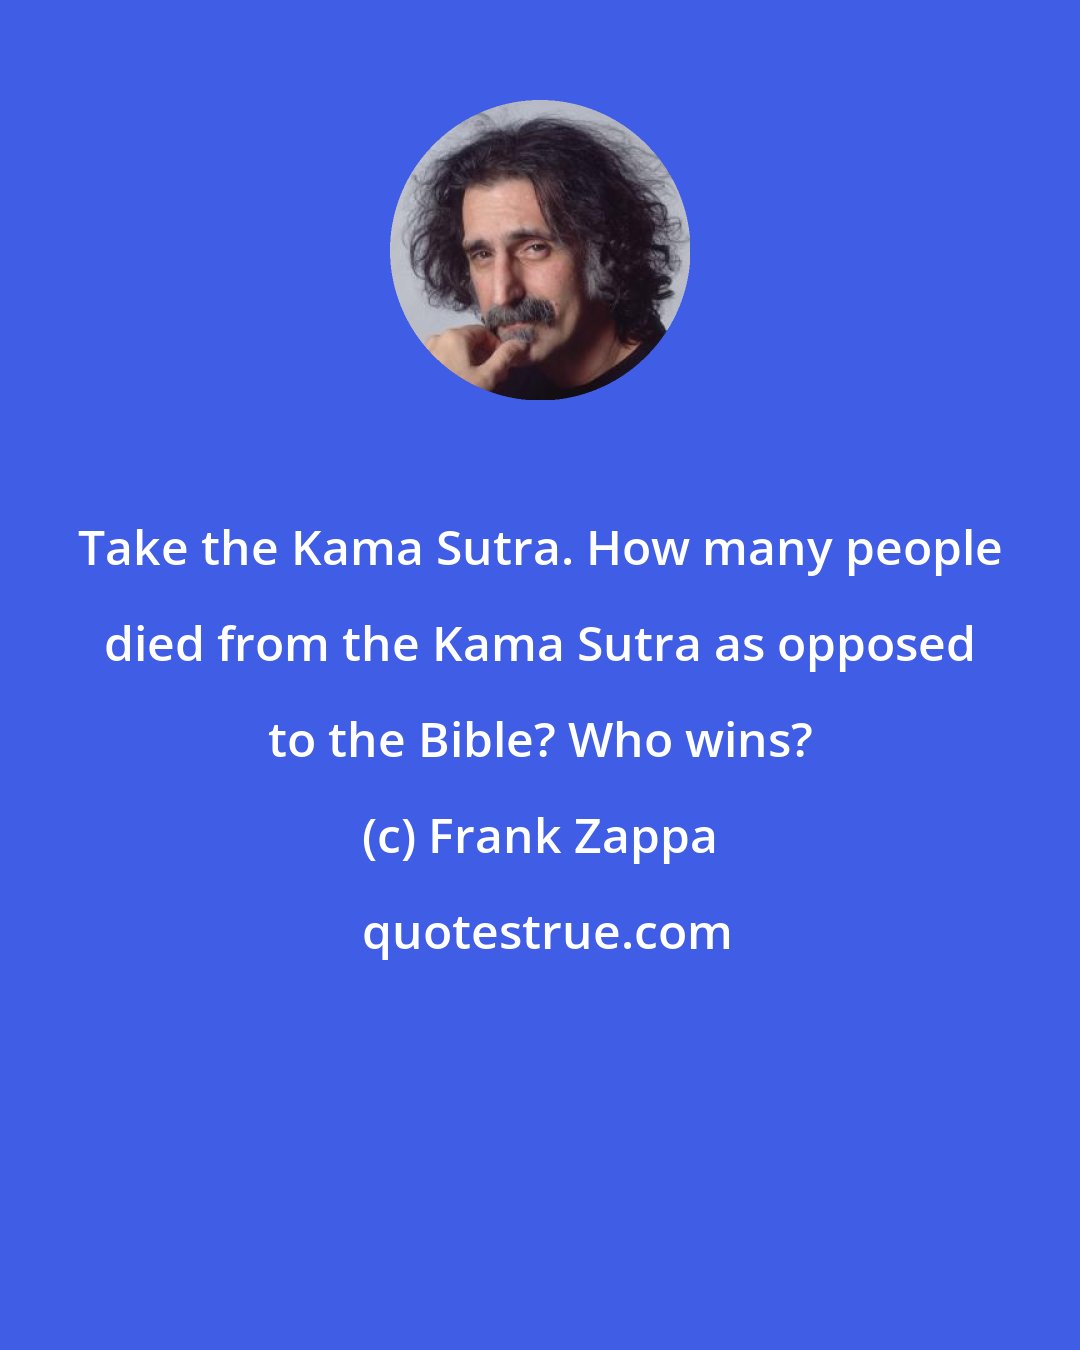 Frank Zappa: Take the Kama Sutra. How many people died from the Kama Sutra as opposed to the Bible? Who wins?